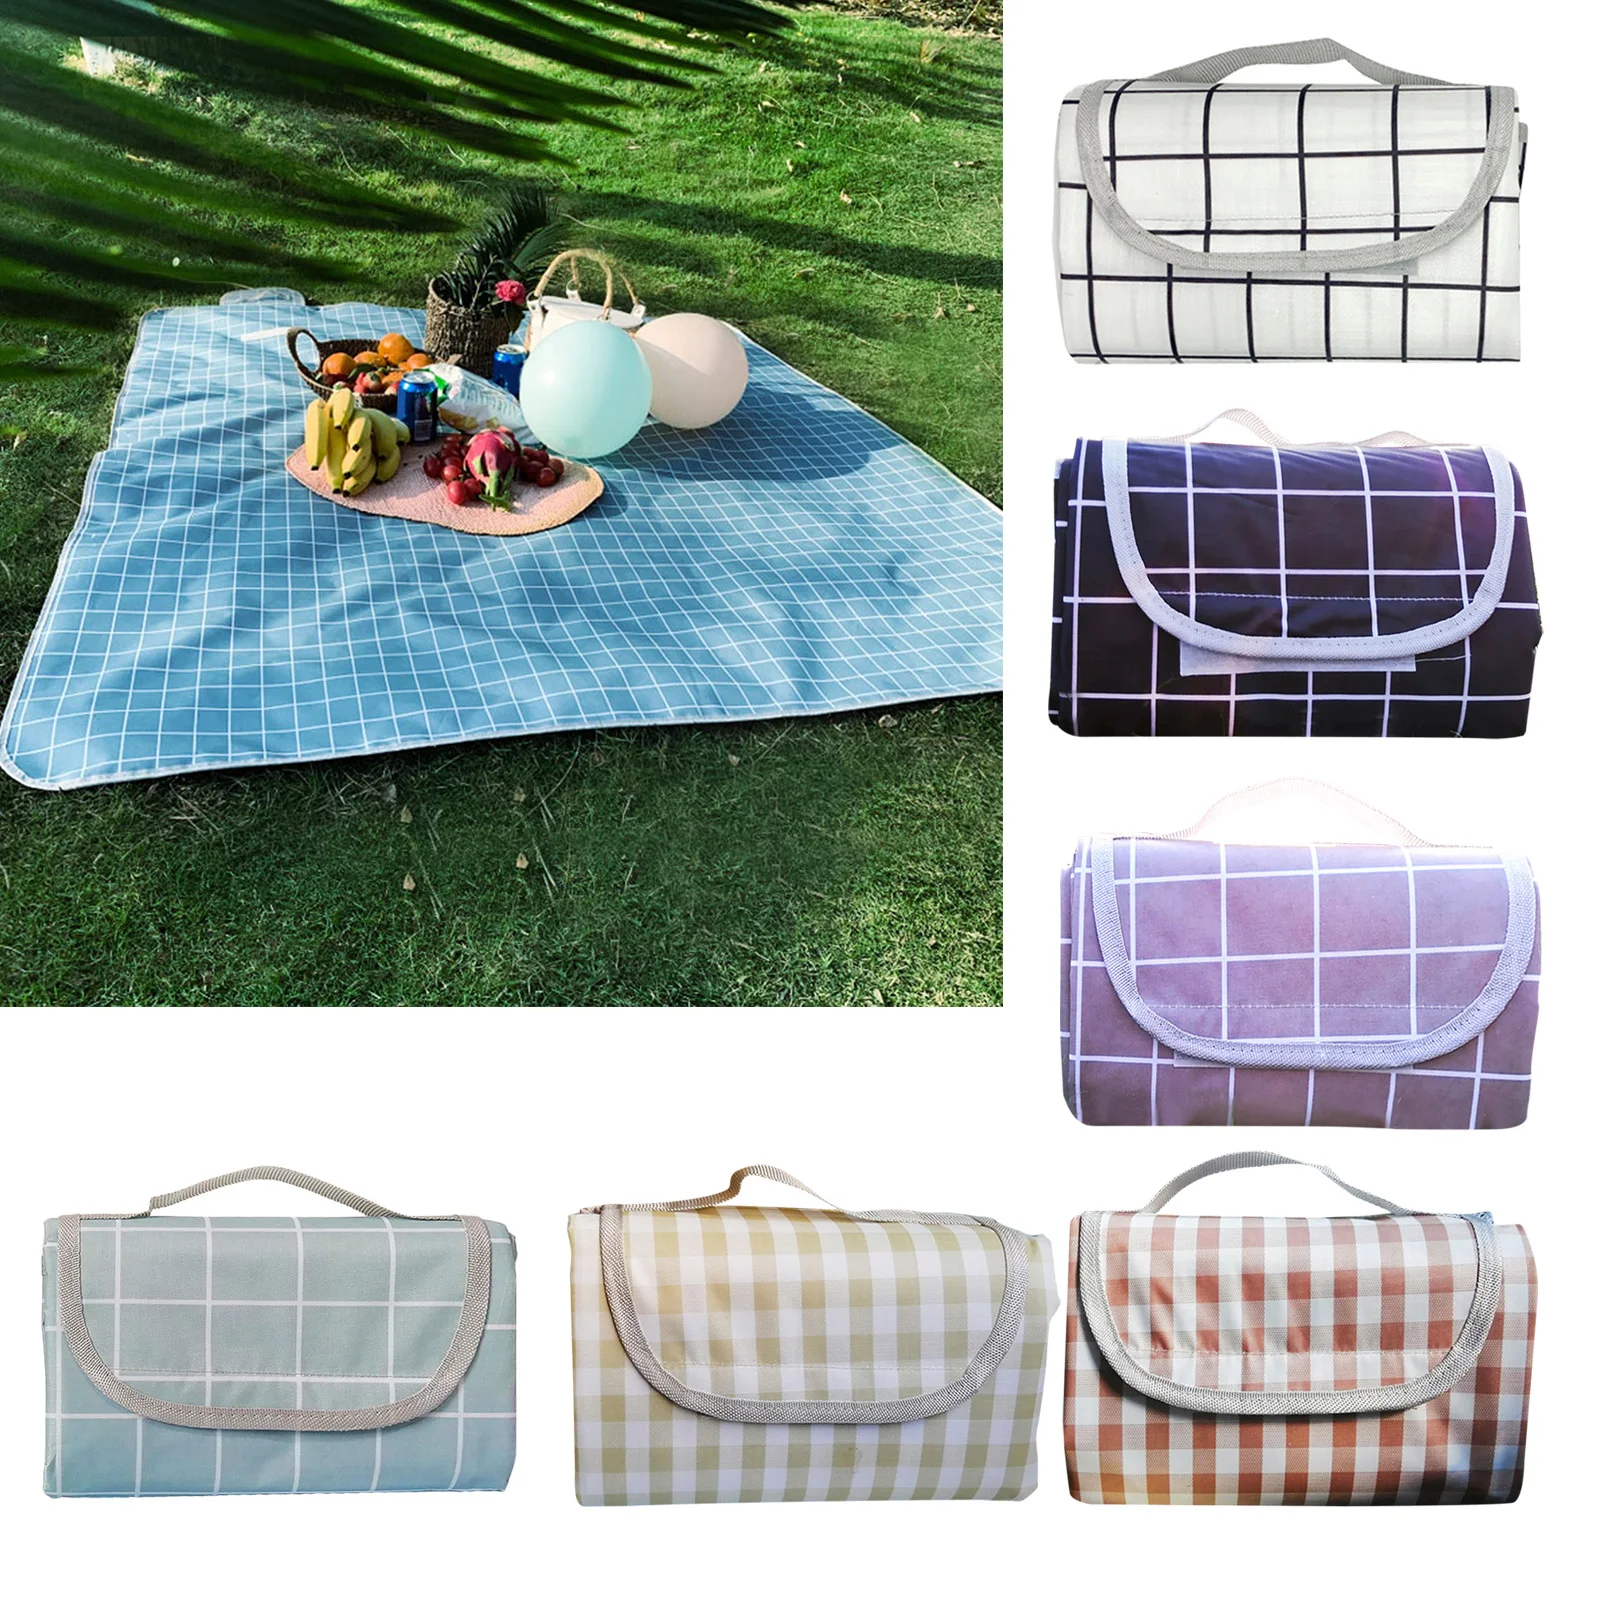 Foldable Picnic Blanket 200x200CM Outdoor Waterproof Picnic Mat Fashion Pad Breathable Water Resistant Picnic Blanket Mat